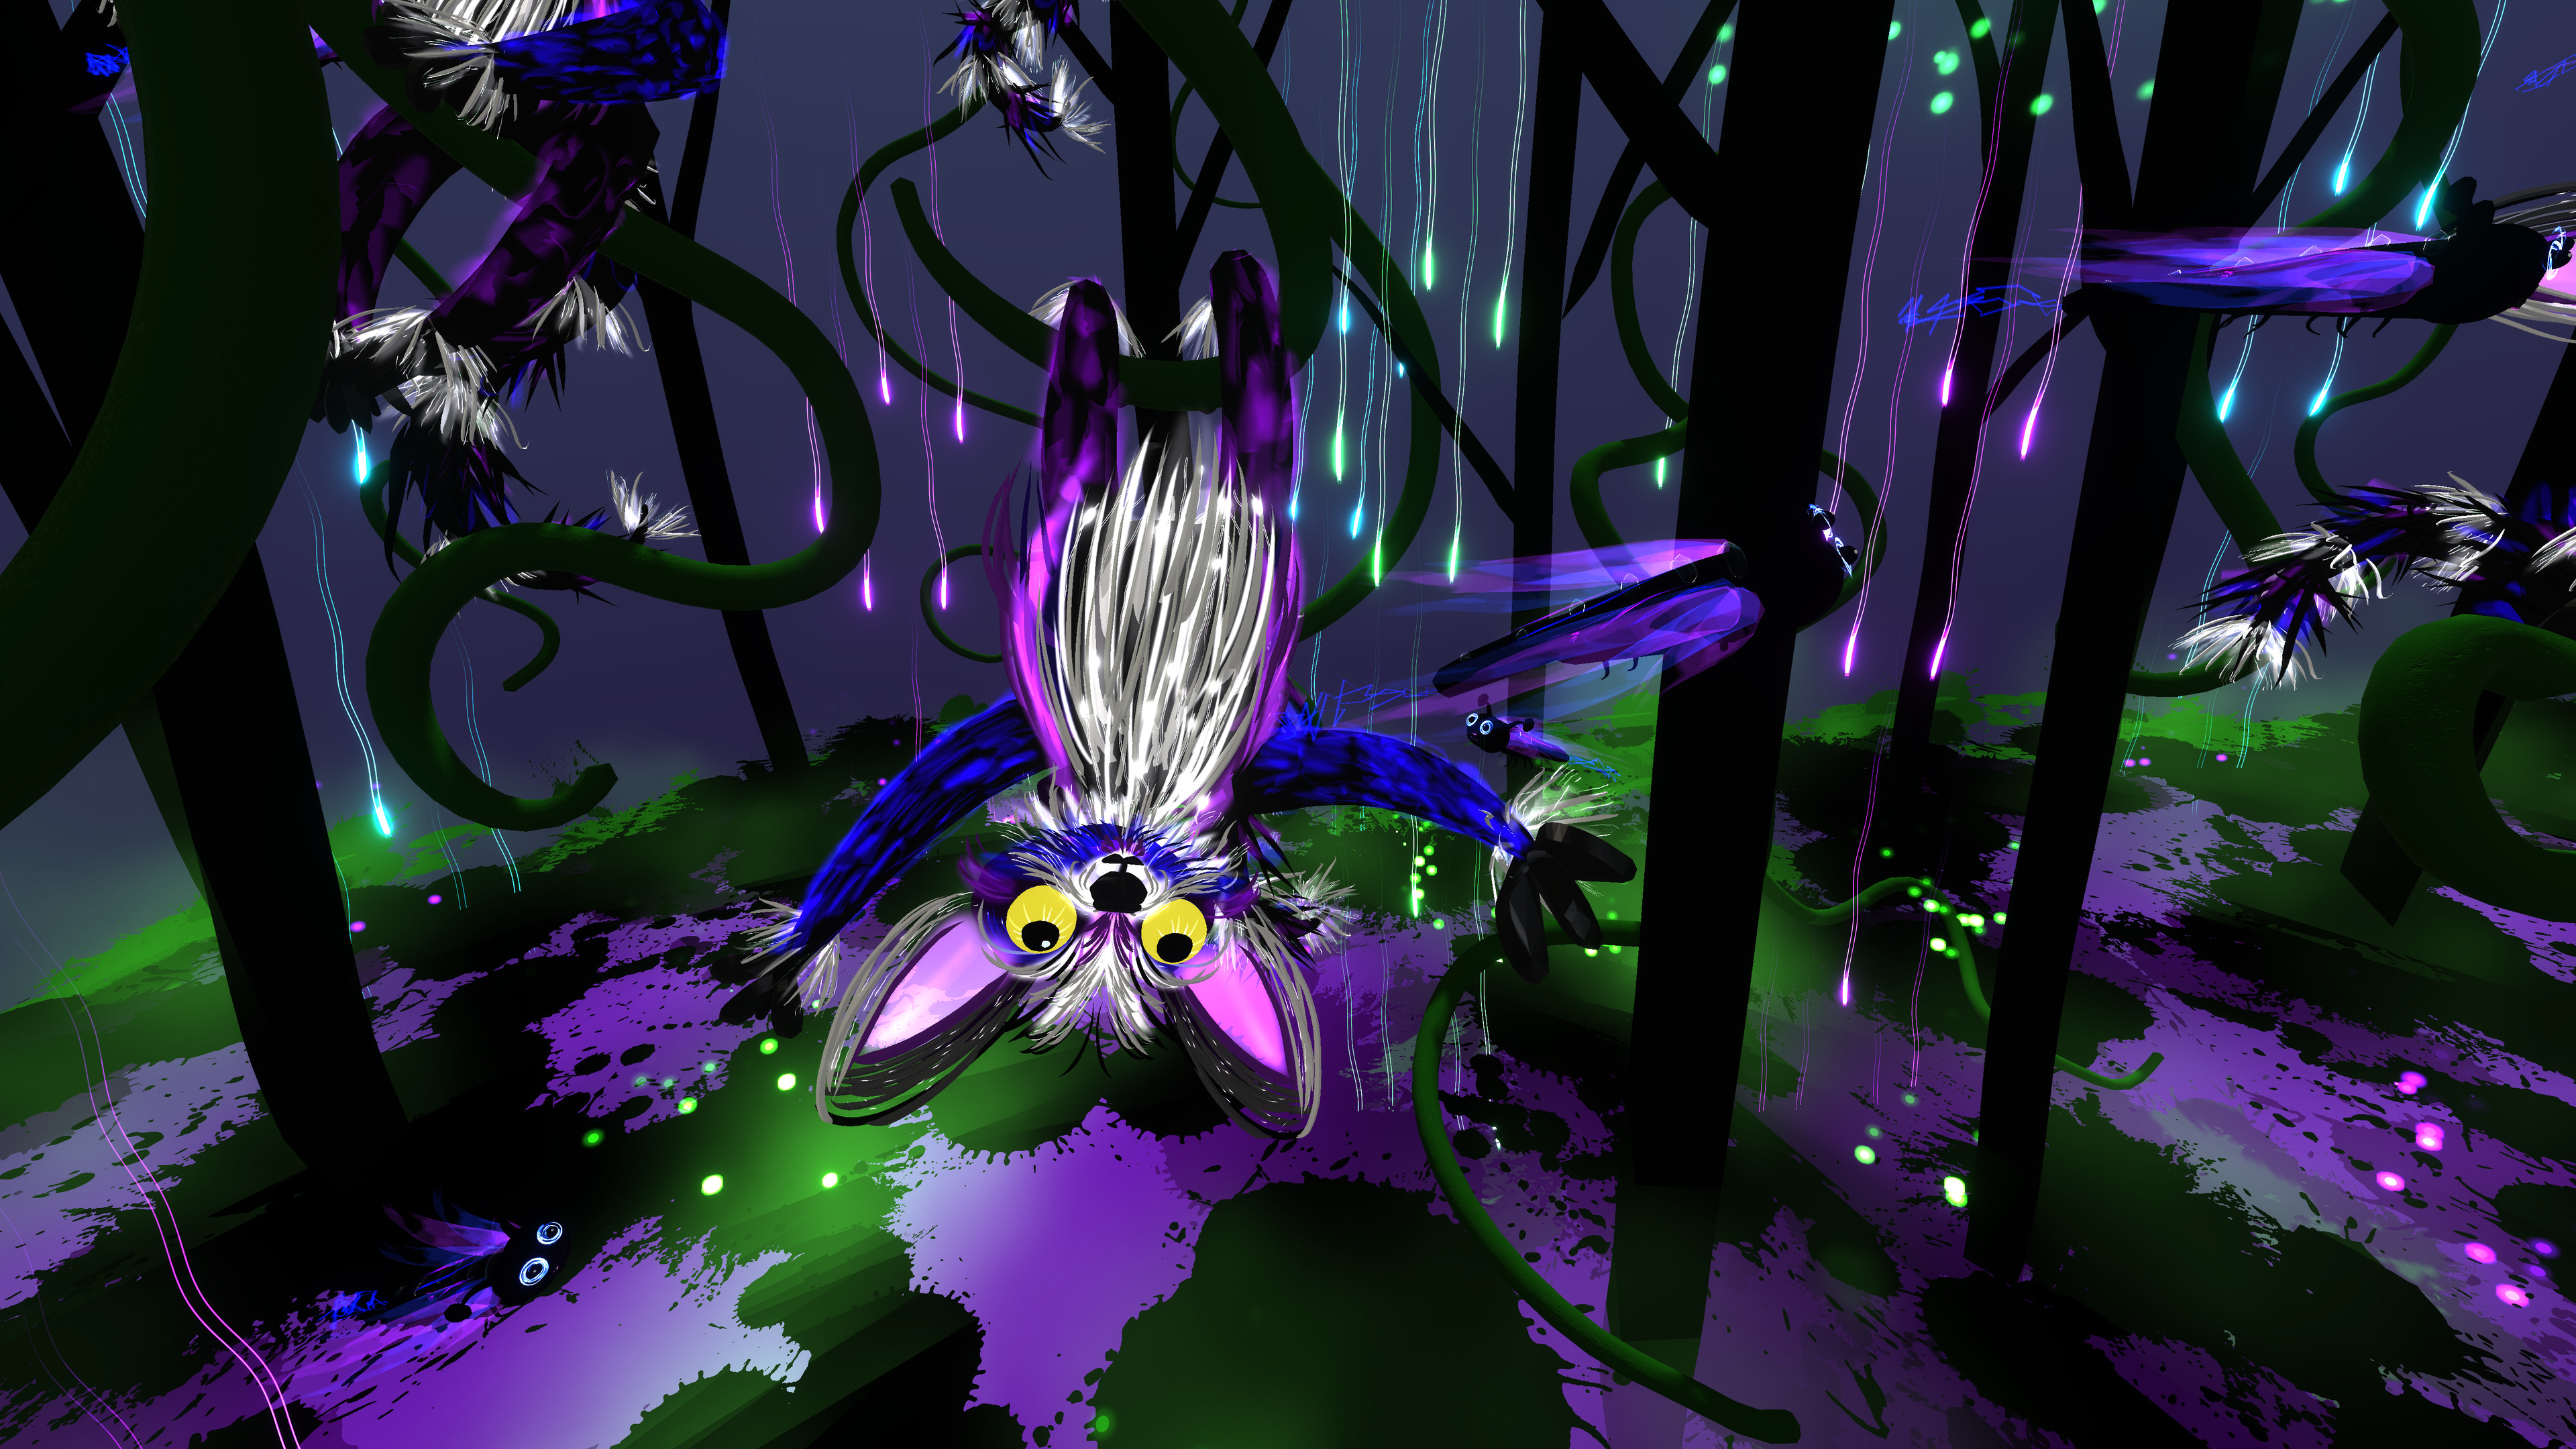 Pwiffles in luminescent forest, also featured in Galactic Safari show